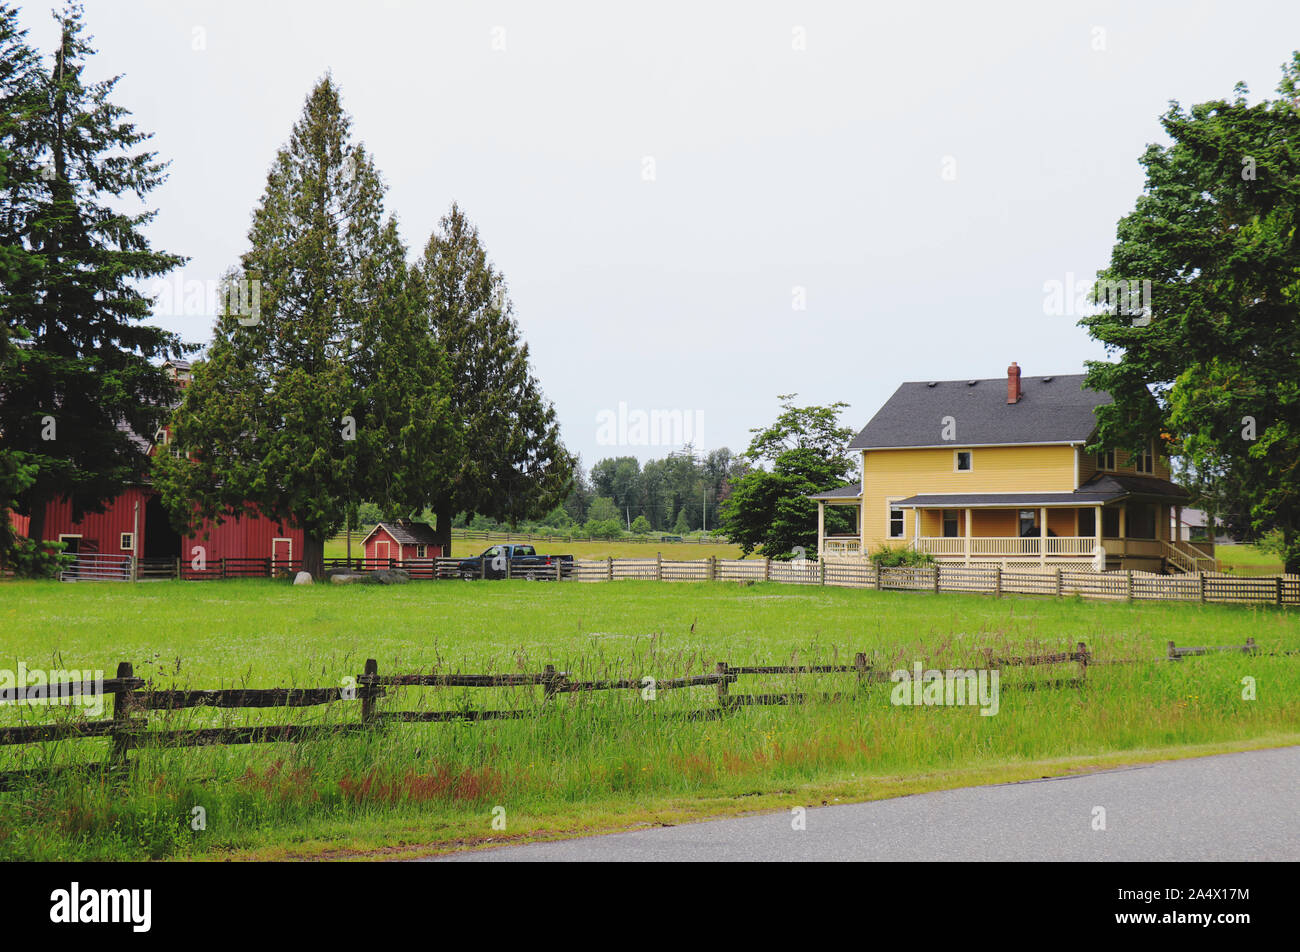 Aldergrove, Canada - June 9, 2019: View of Beautiful farm which have been used as filming location "Kent Farm" in TV Show "Smallville" and this Place Stock Photo